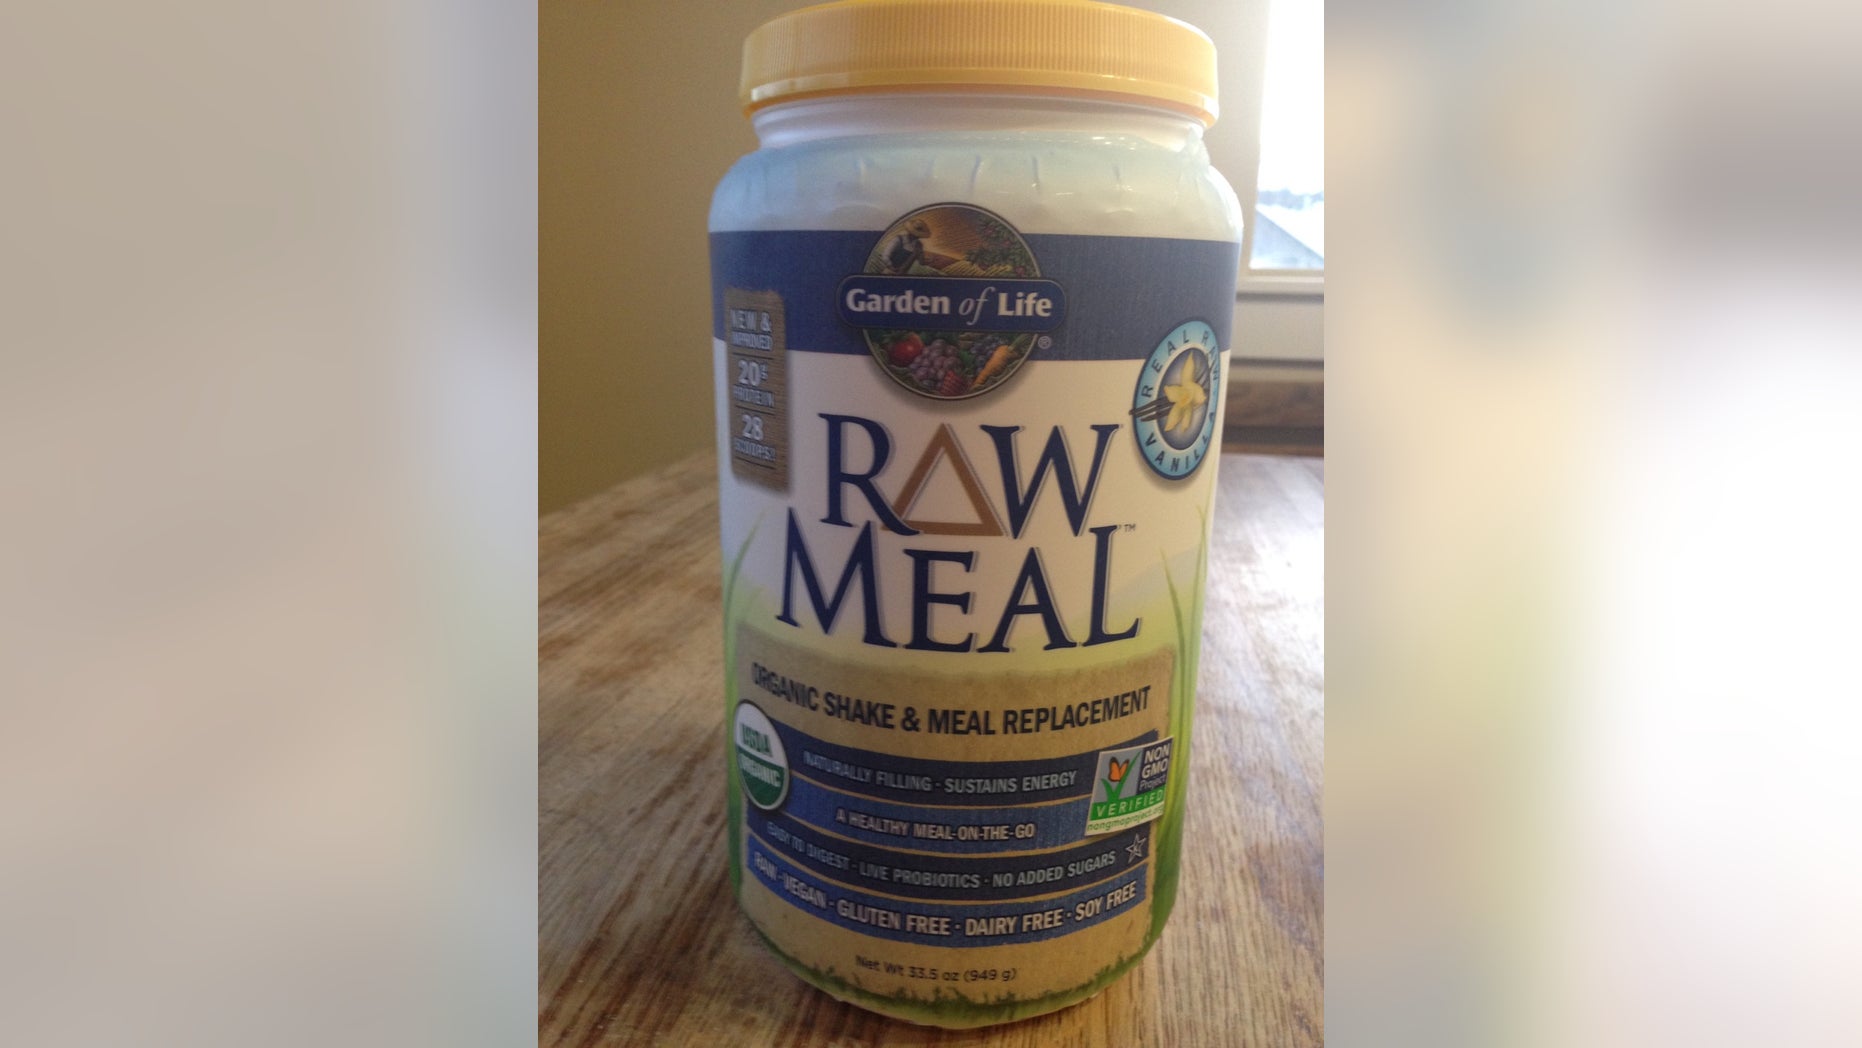 Garden Of Life Organic Meals And Shakes Recalled Linked To 11